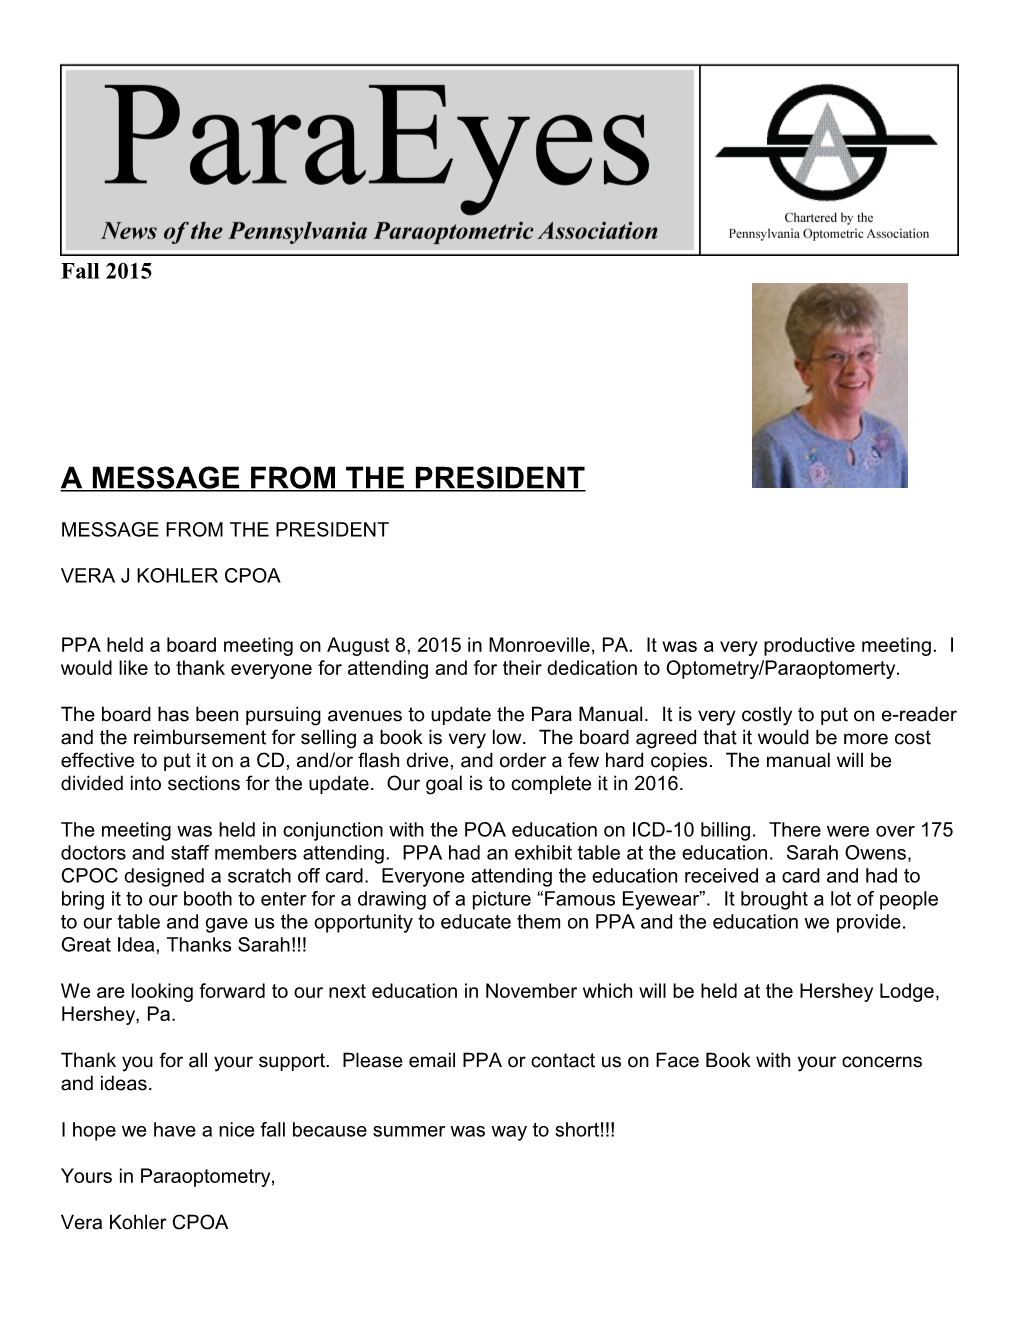 Paraeyes Page 1 Fall 2015